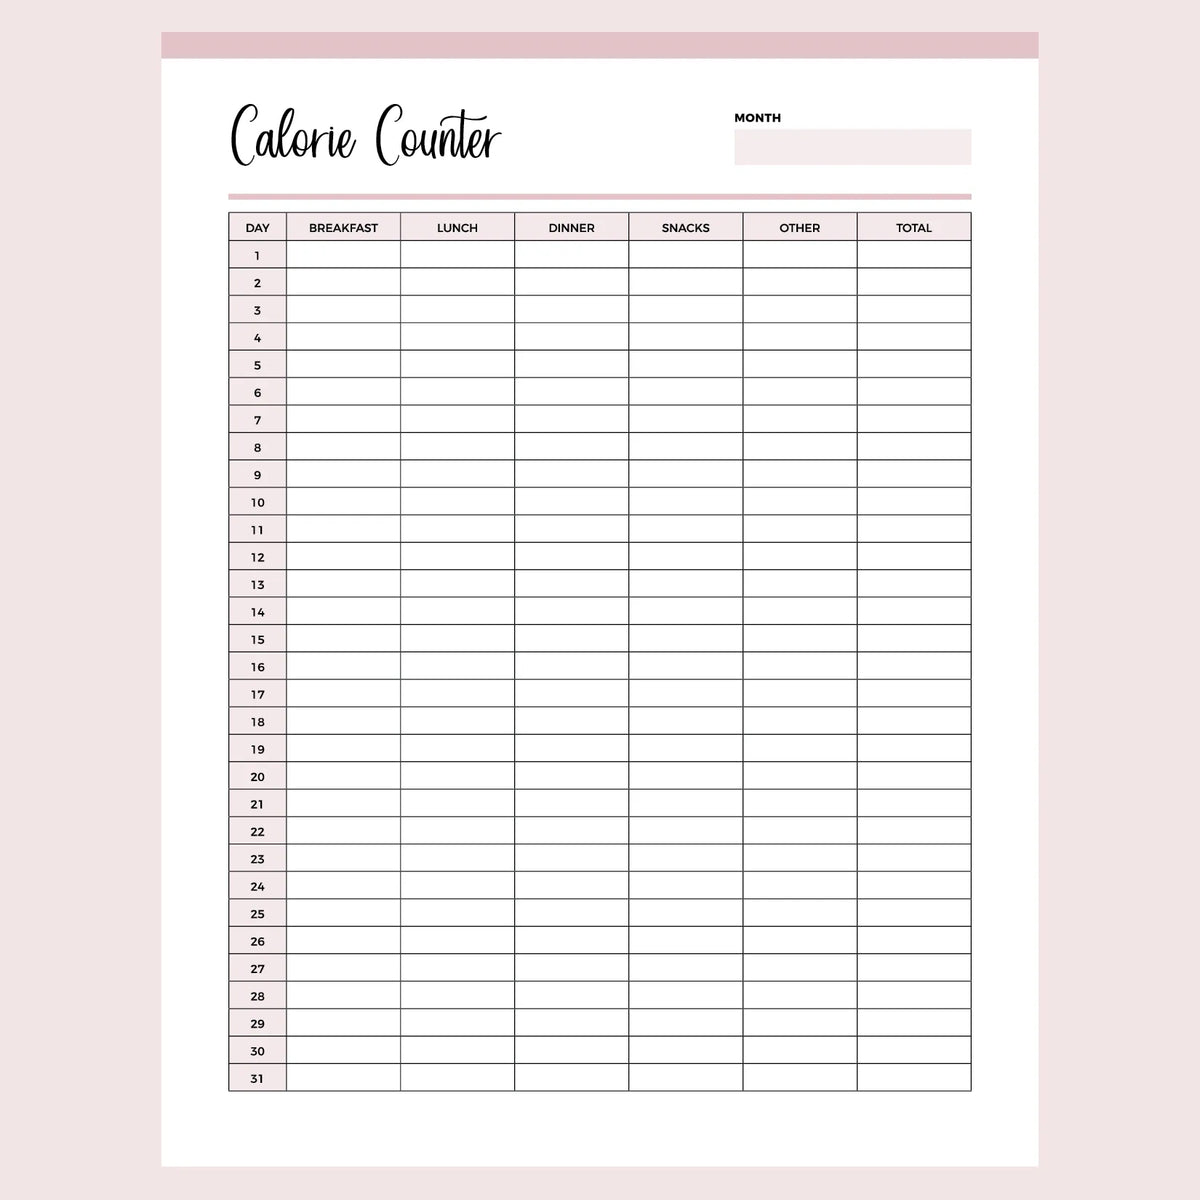 diet counting calories chart